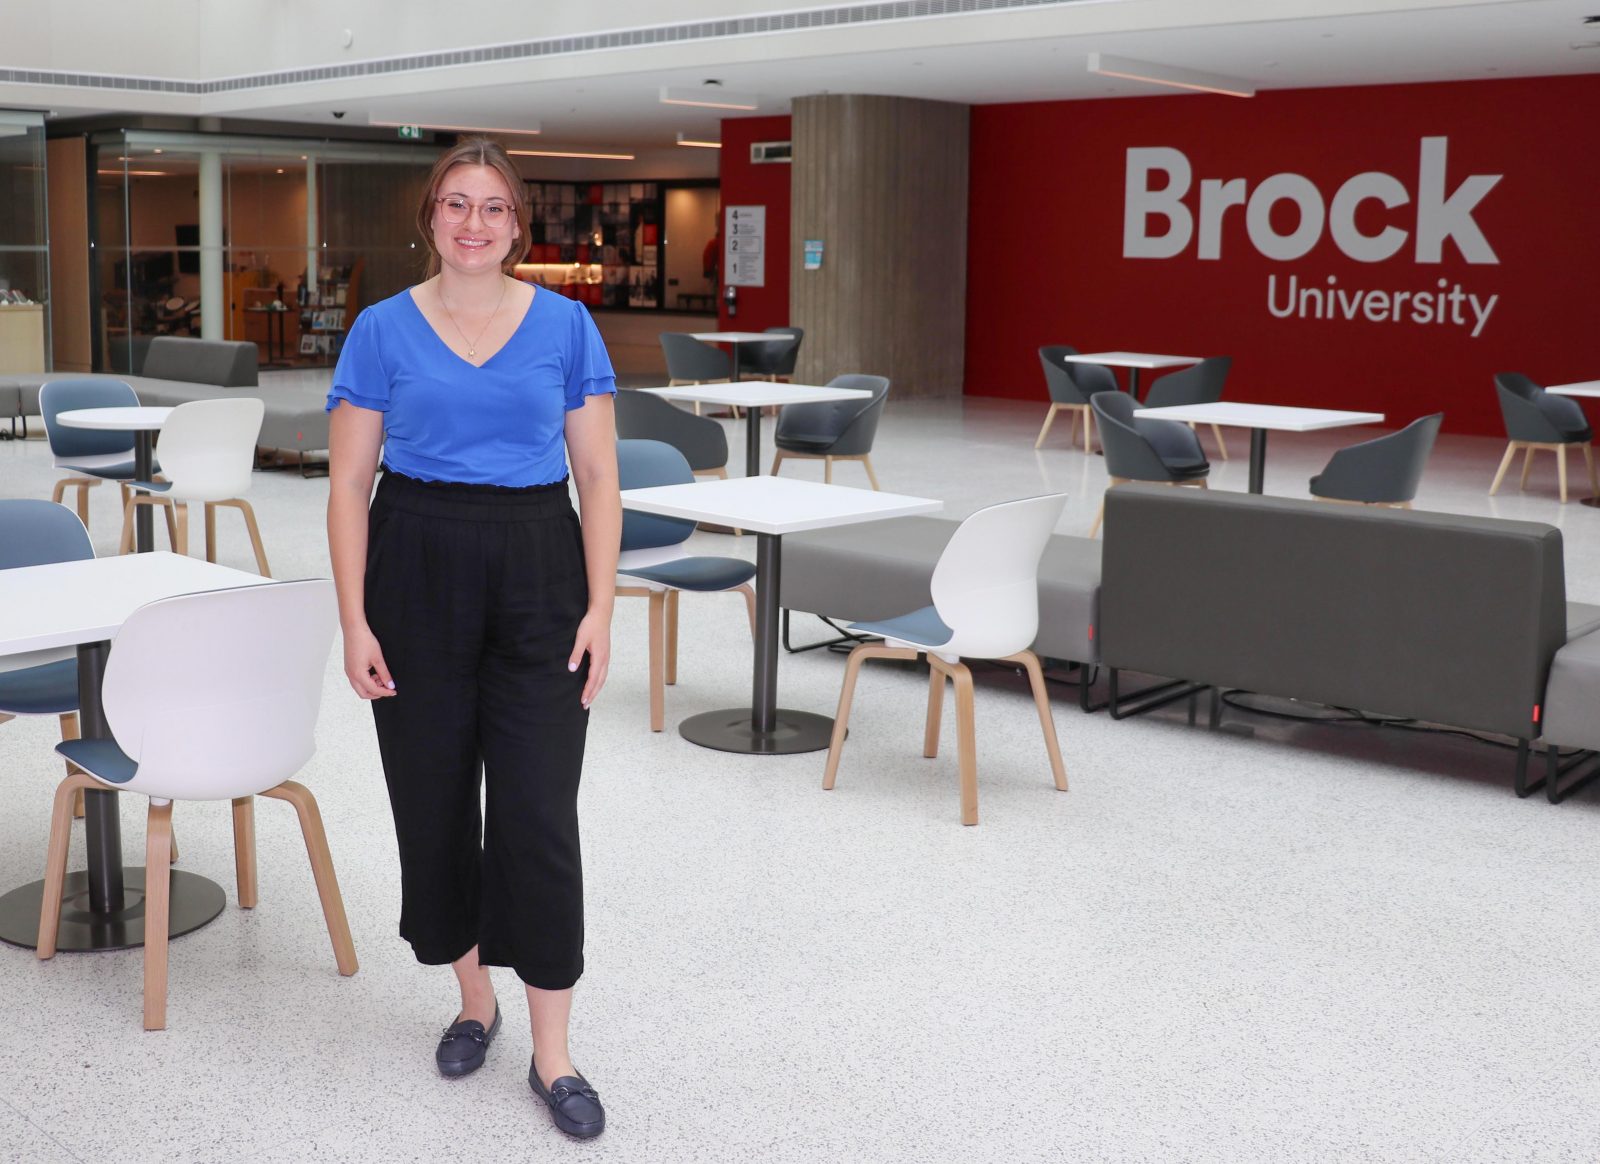 A woman stands in an indoor atrium in front of a painted wall that says ‘Brock’.